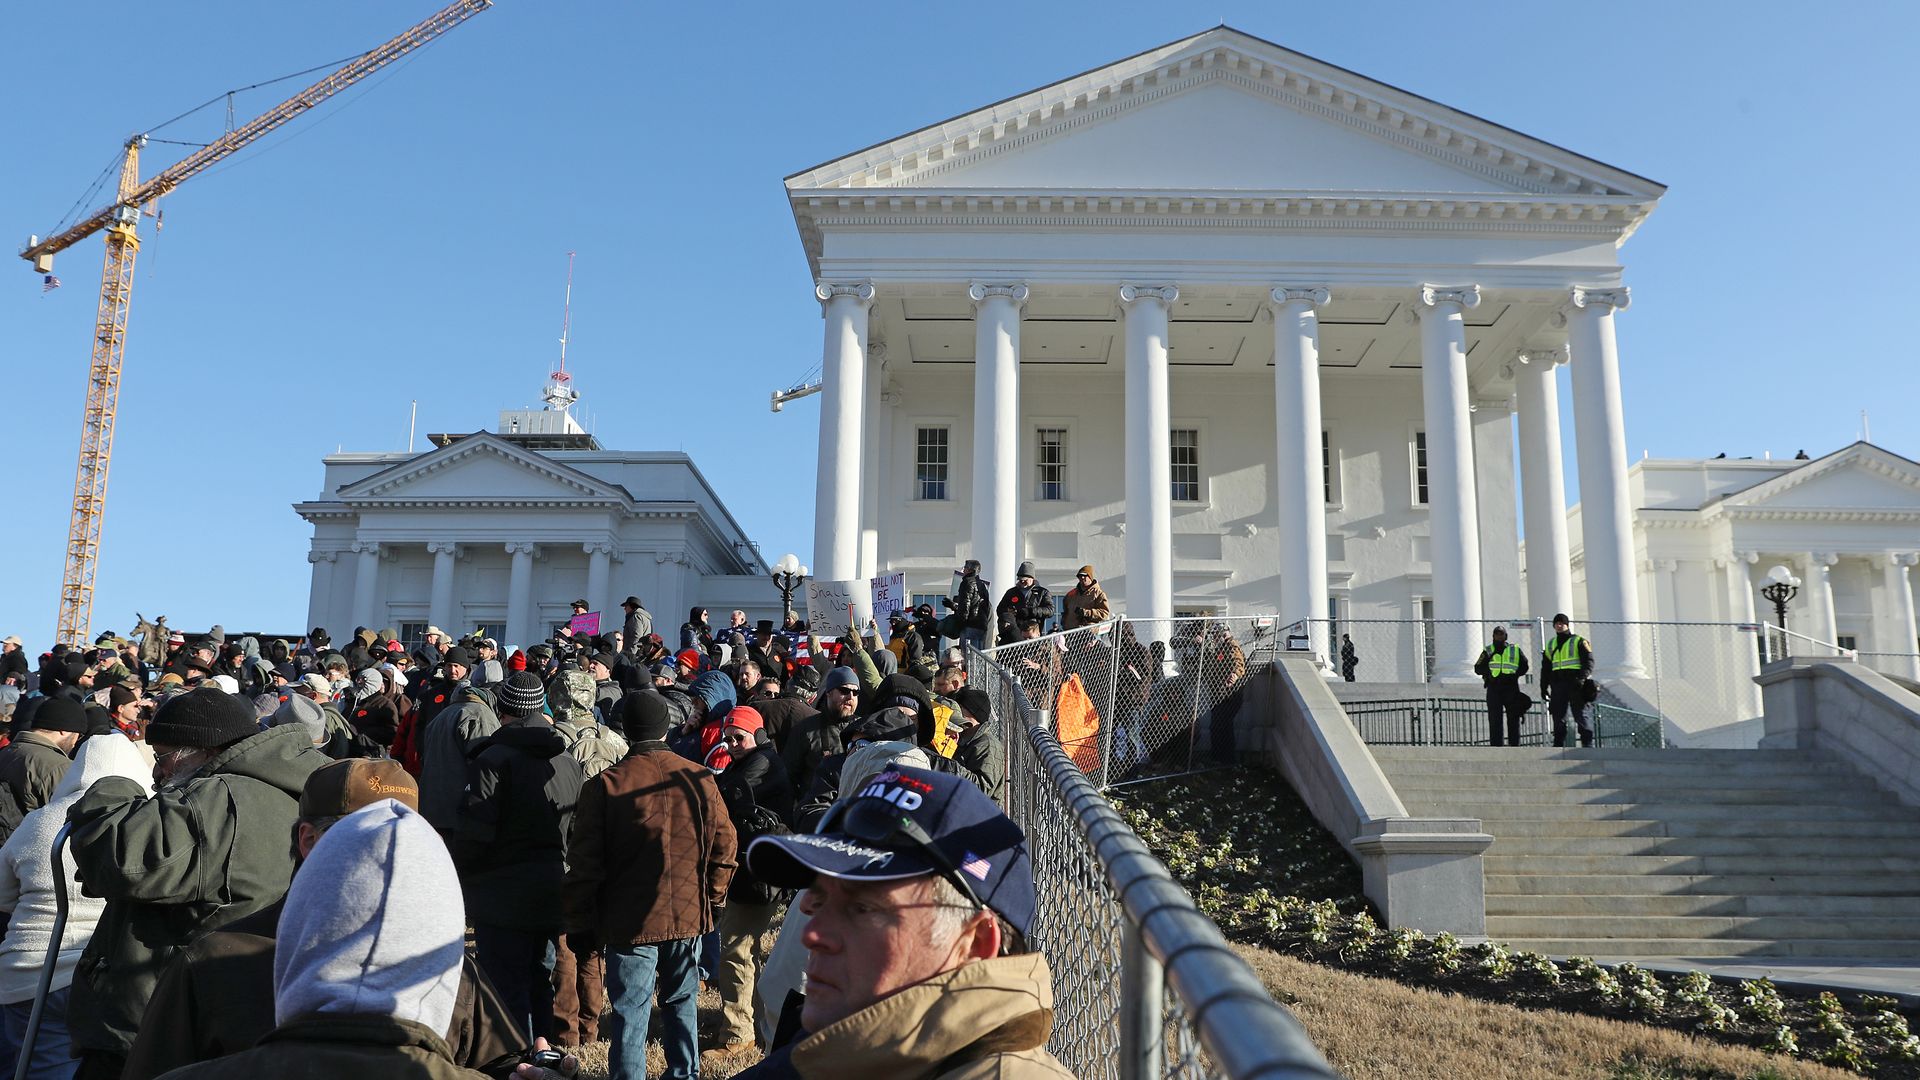 In this image, a crowd of protestors stand outside a virginia courthouse